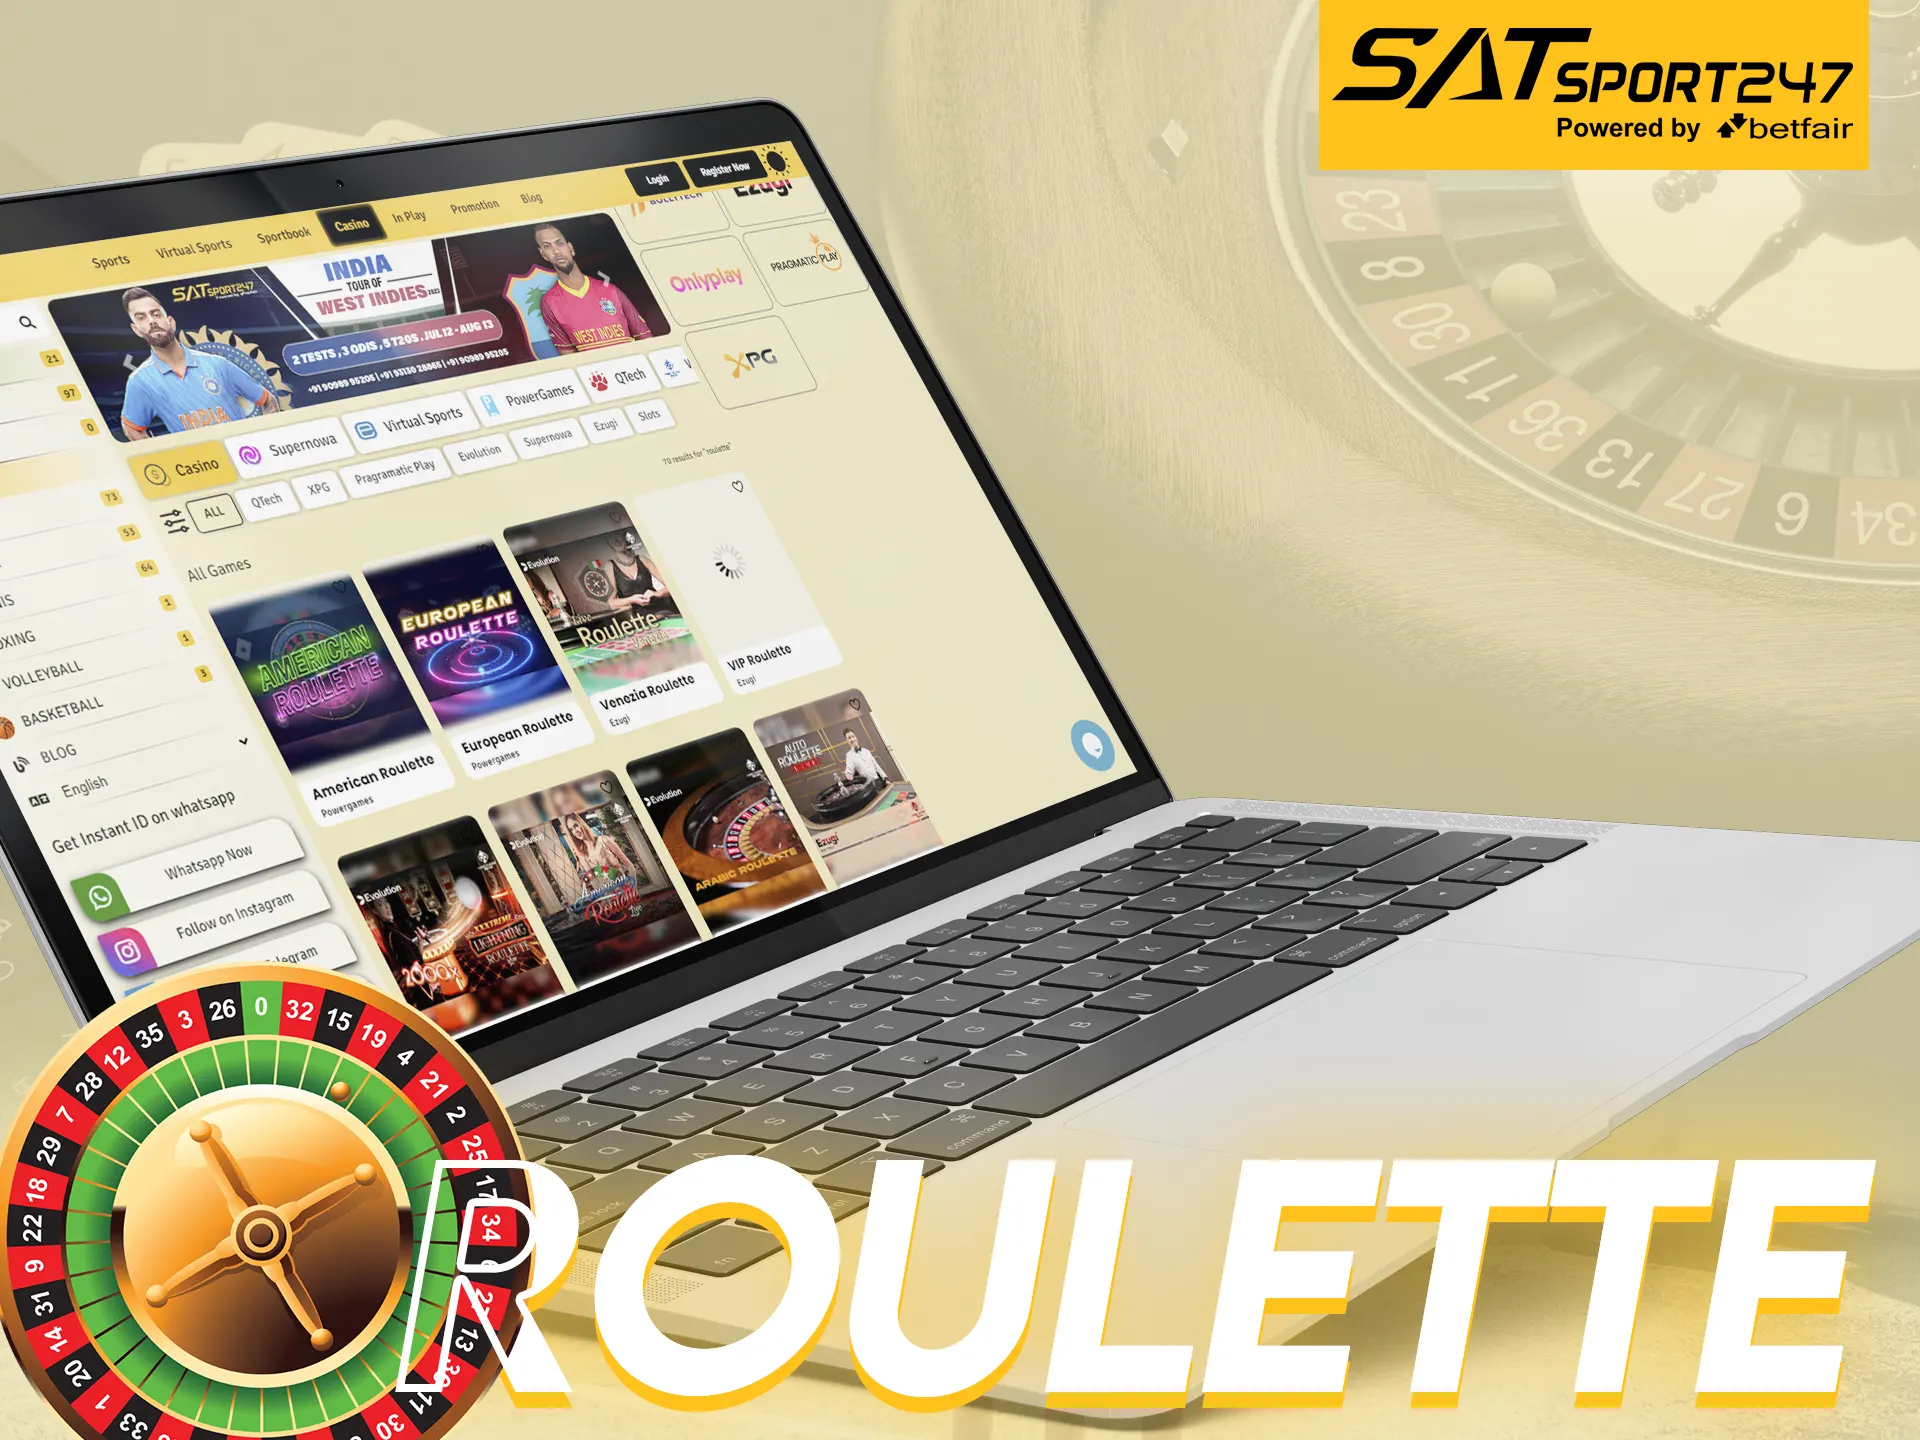 Play roulette on Satsport247.